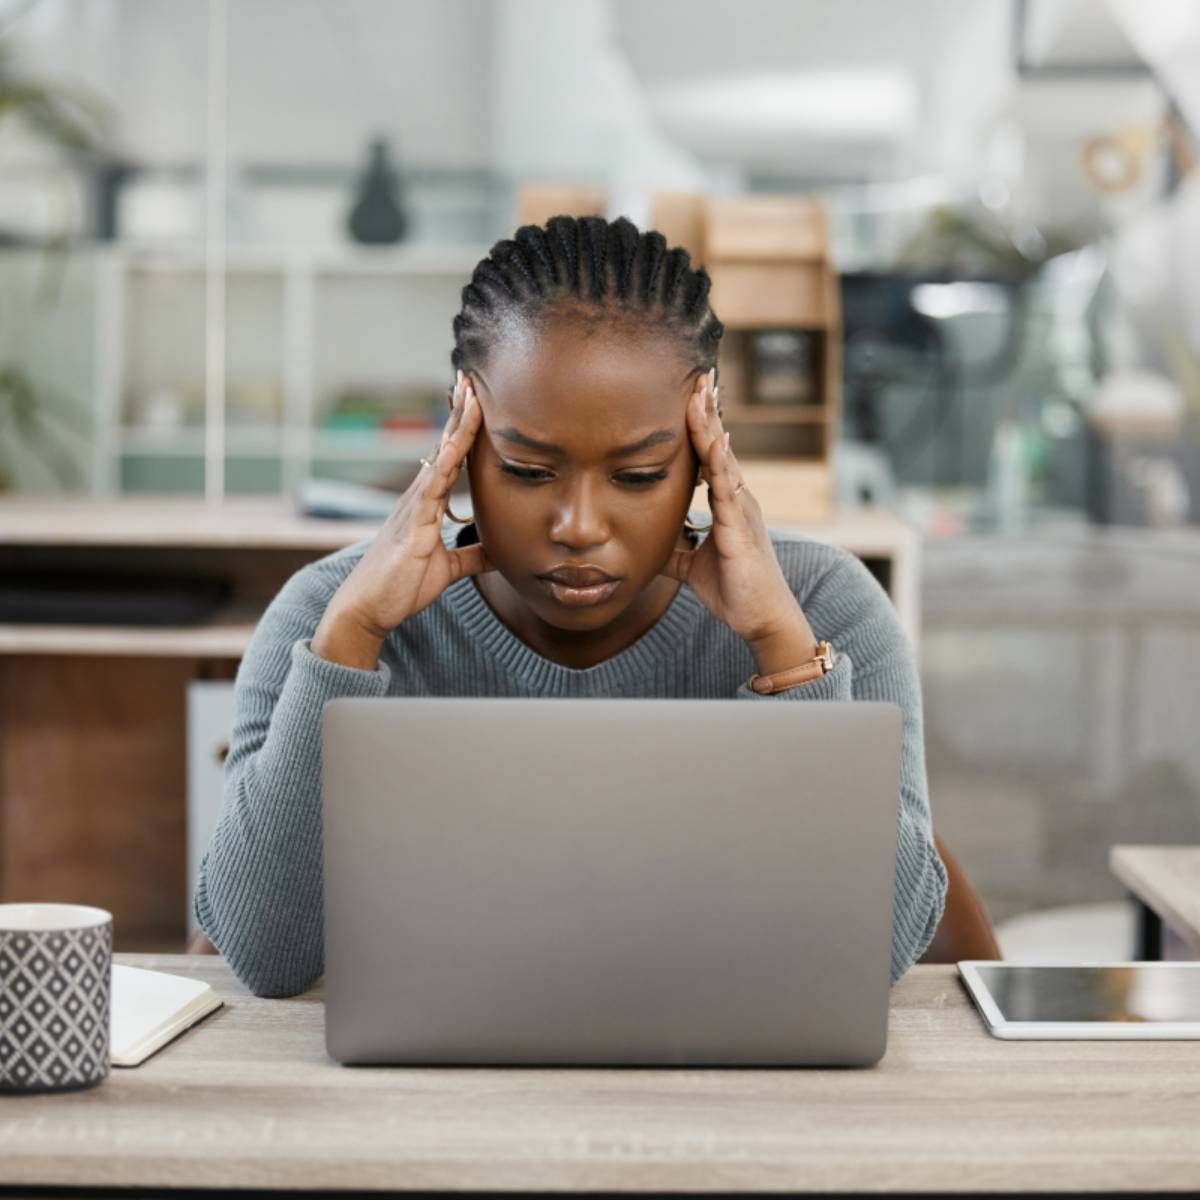 A woman working on her laptop and looking stressed out.